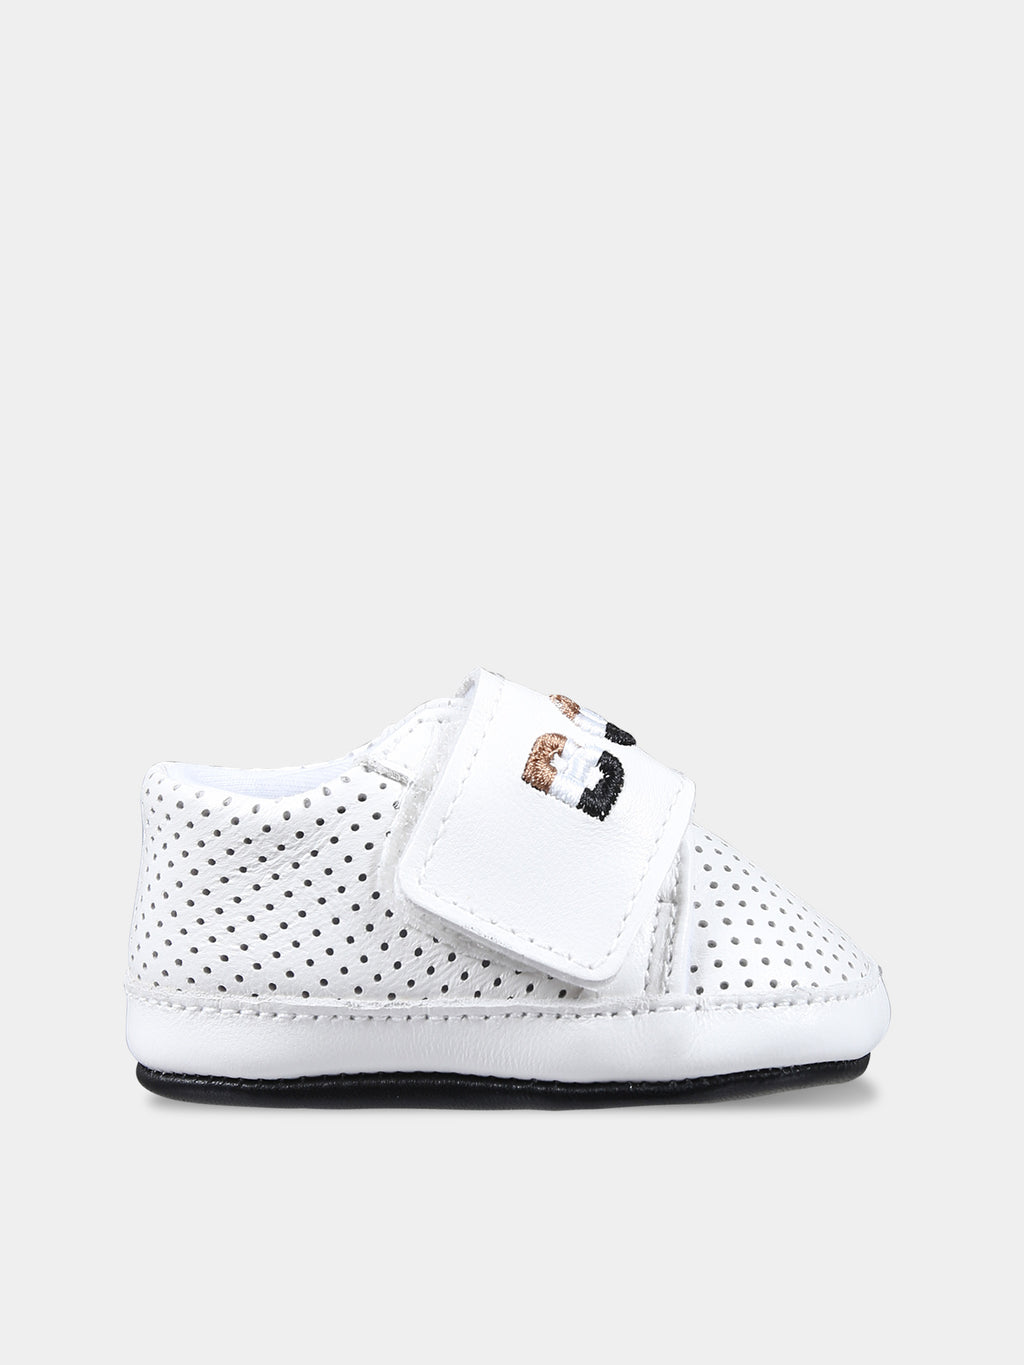 White sneakers for baby boy with logo